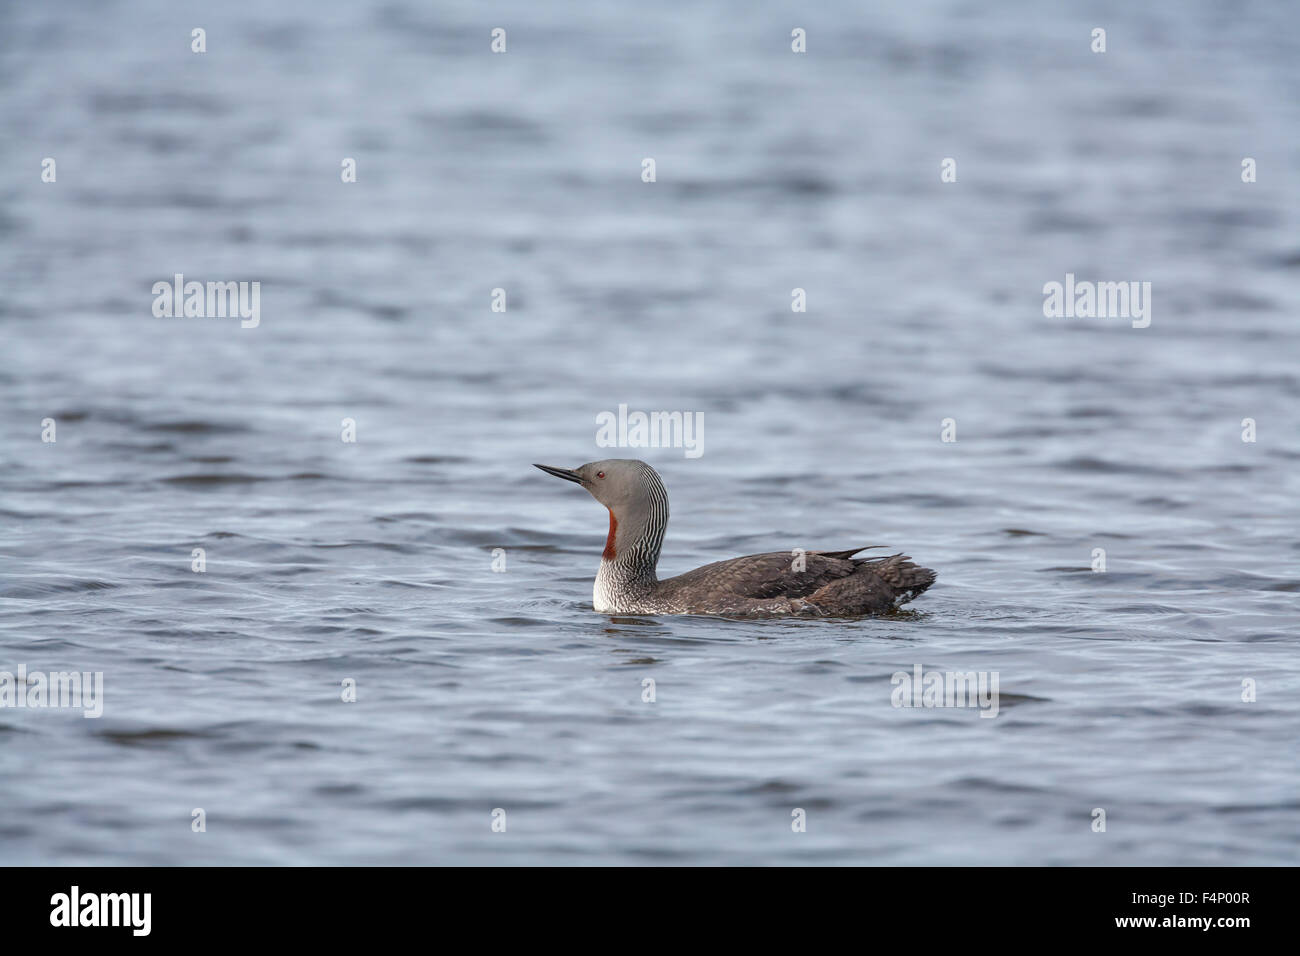 Red-throated diver Gavia stellata, adult, swimming with reflection, Loch Funzie, Fetlar, Scotland, UK in June. Stock Photo